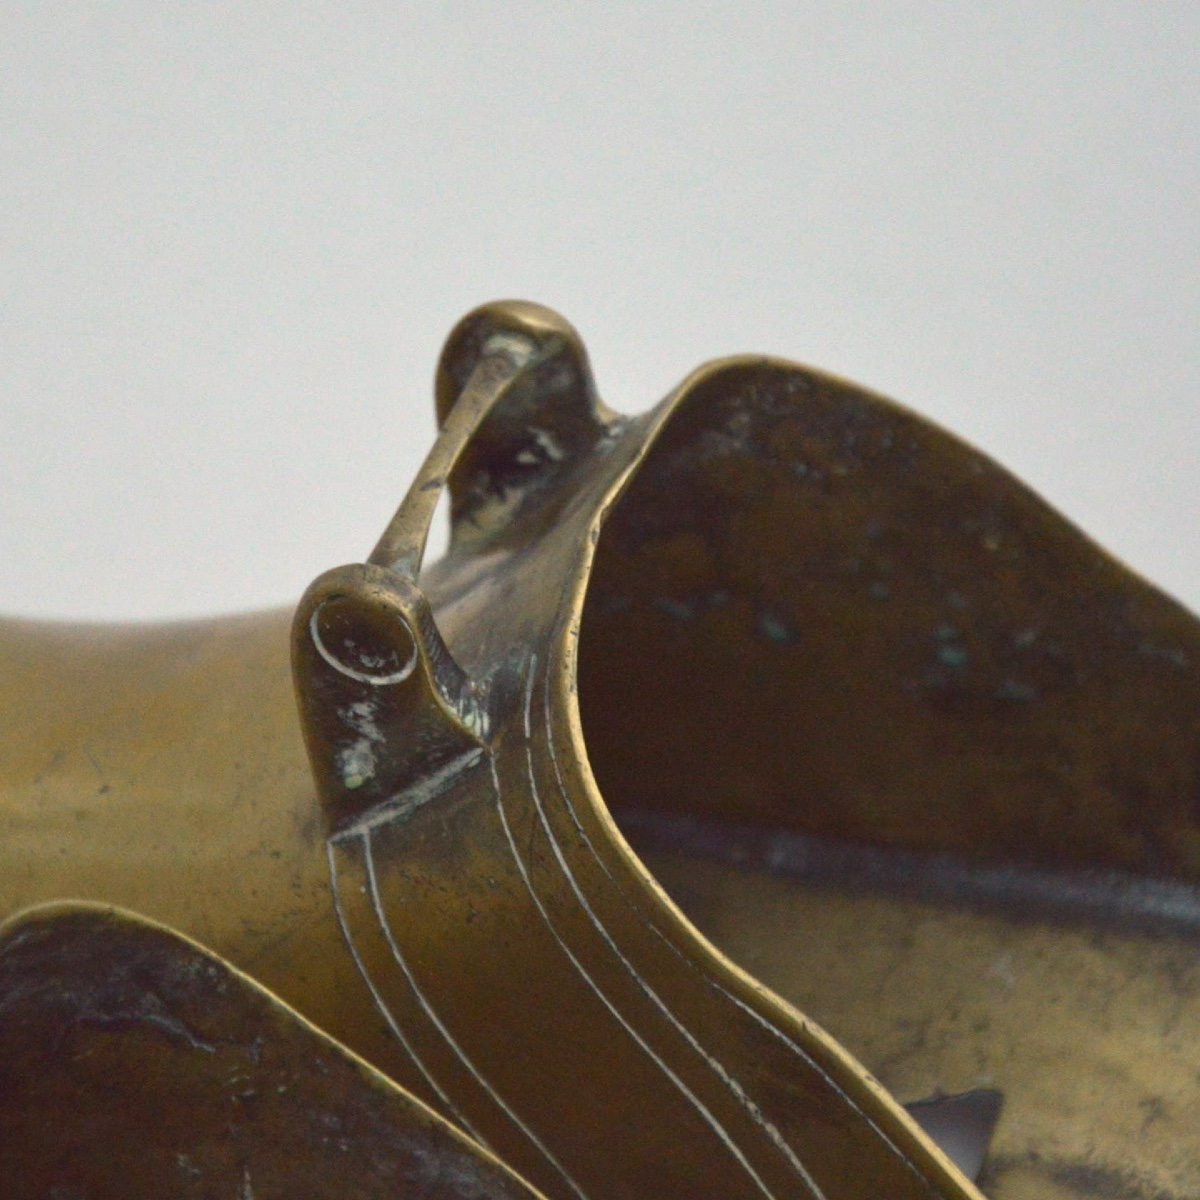 Pair Of Brass Horse Stirrups In The Shape Of A Hoof 19th Century-photo-3